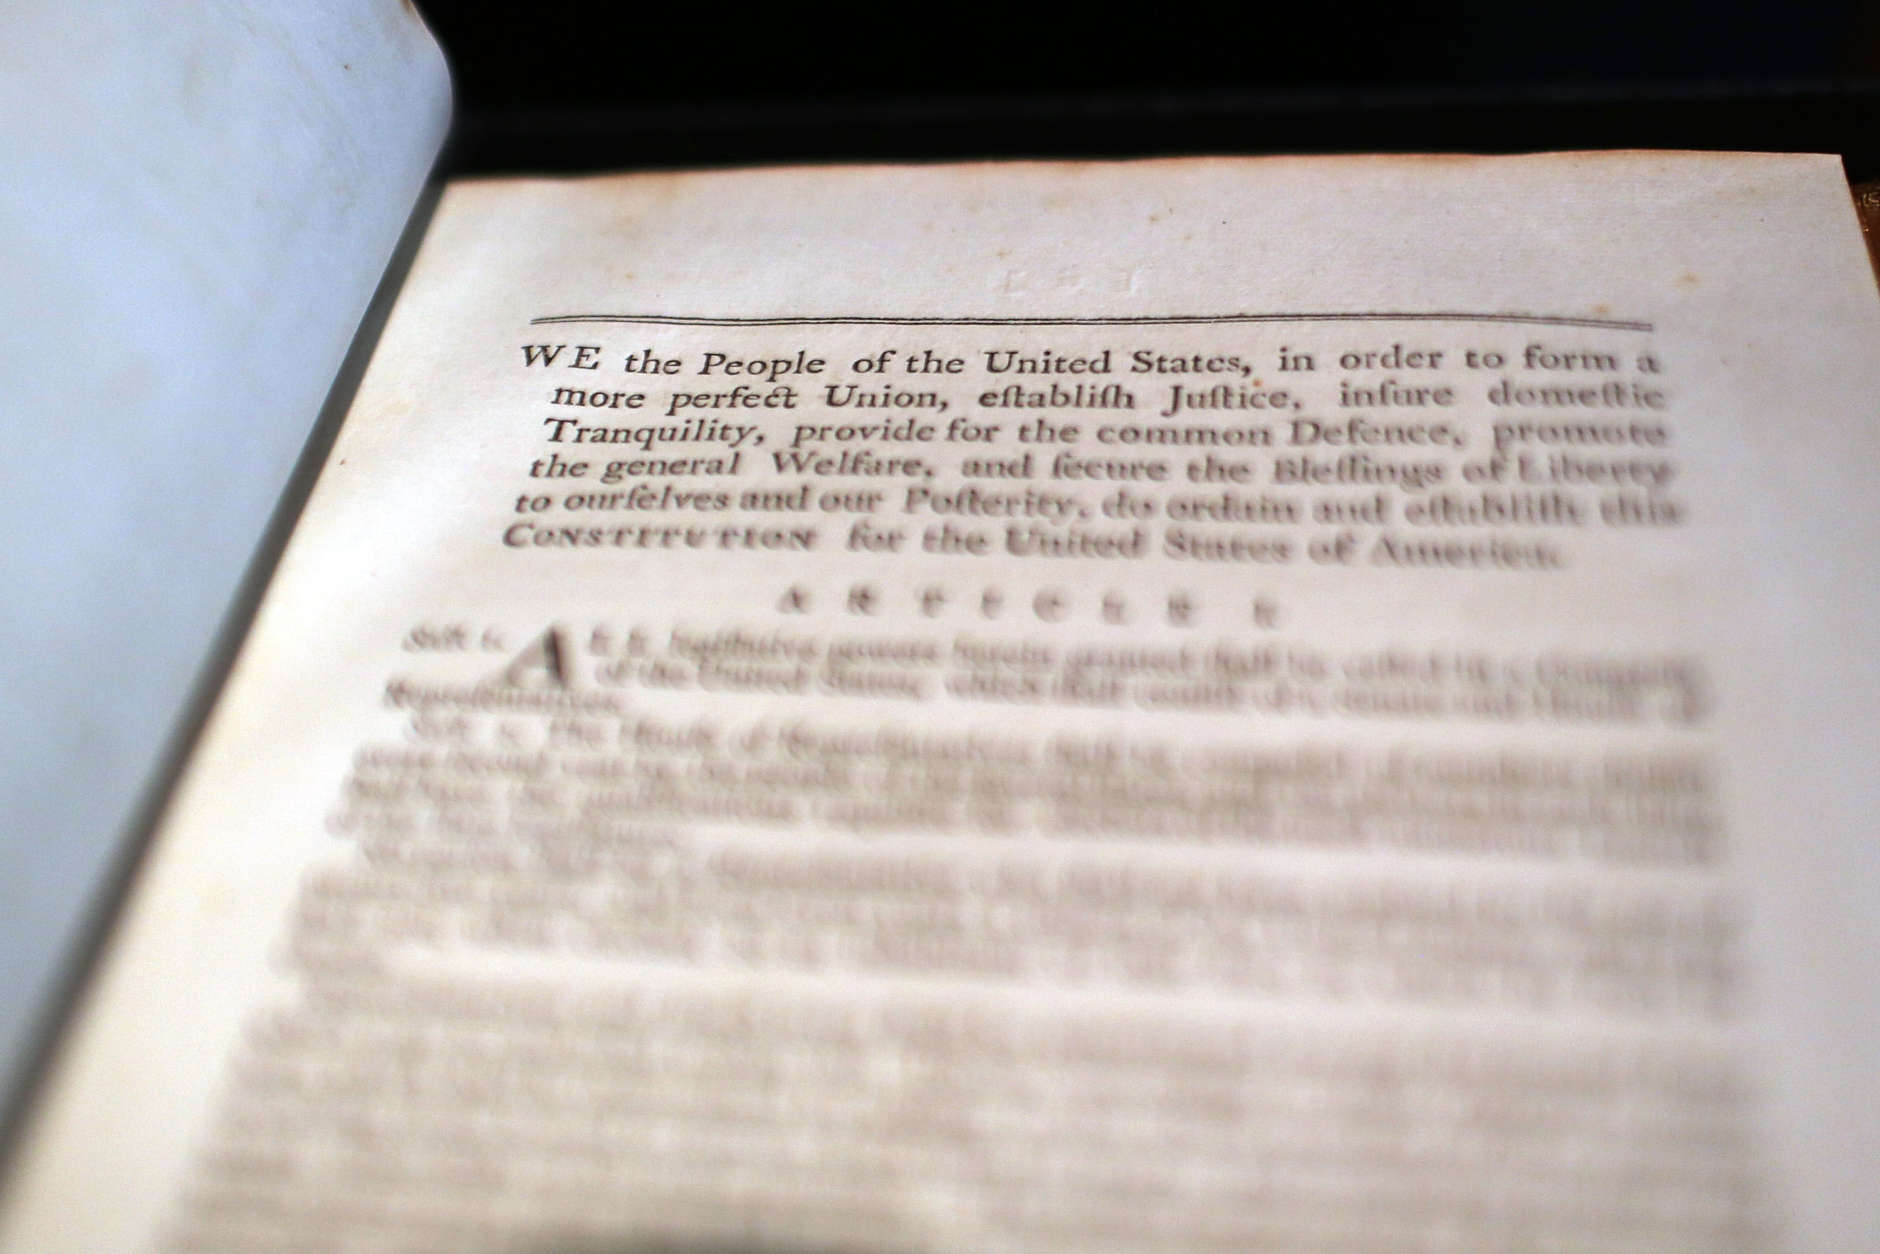 NEW YORK, NY - JUNE 15:  A copy of former President George Washington's personal copy of the Constitution and Bill of Rights is displayed at Christie's auction house on June 15, 2012 in New York City. The artifact, which is signed and has notes by Washington, will be put up for auction on June 22 and is expected to sell for $2 million to $3 million.  (Photo by Spencer Platt/Getty Images)